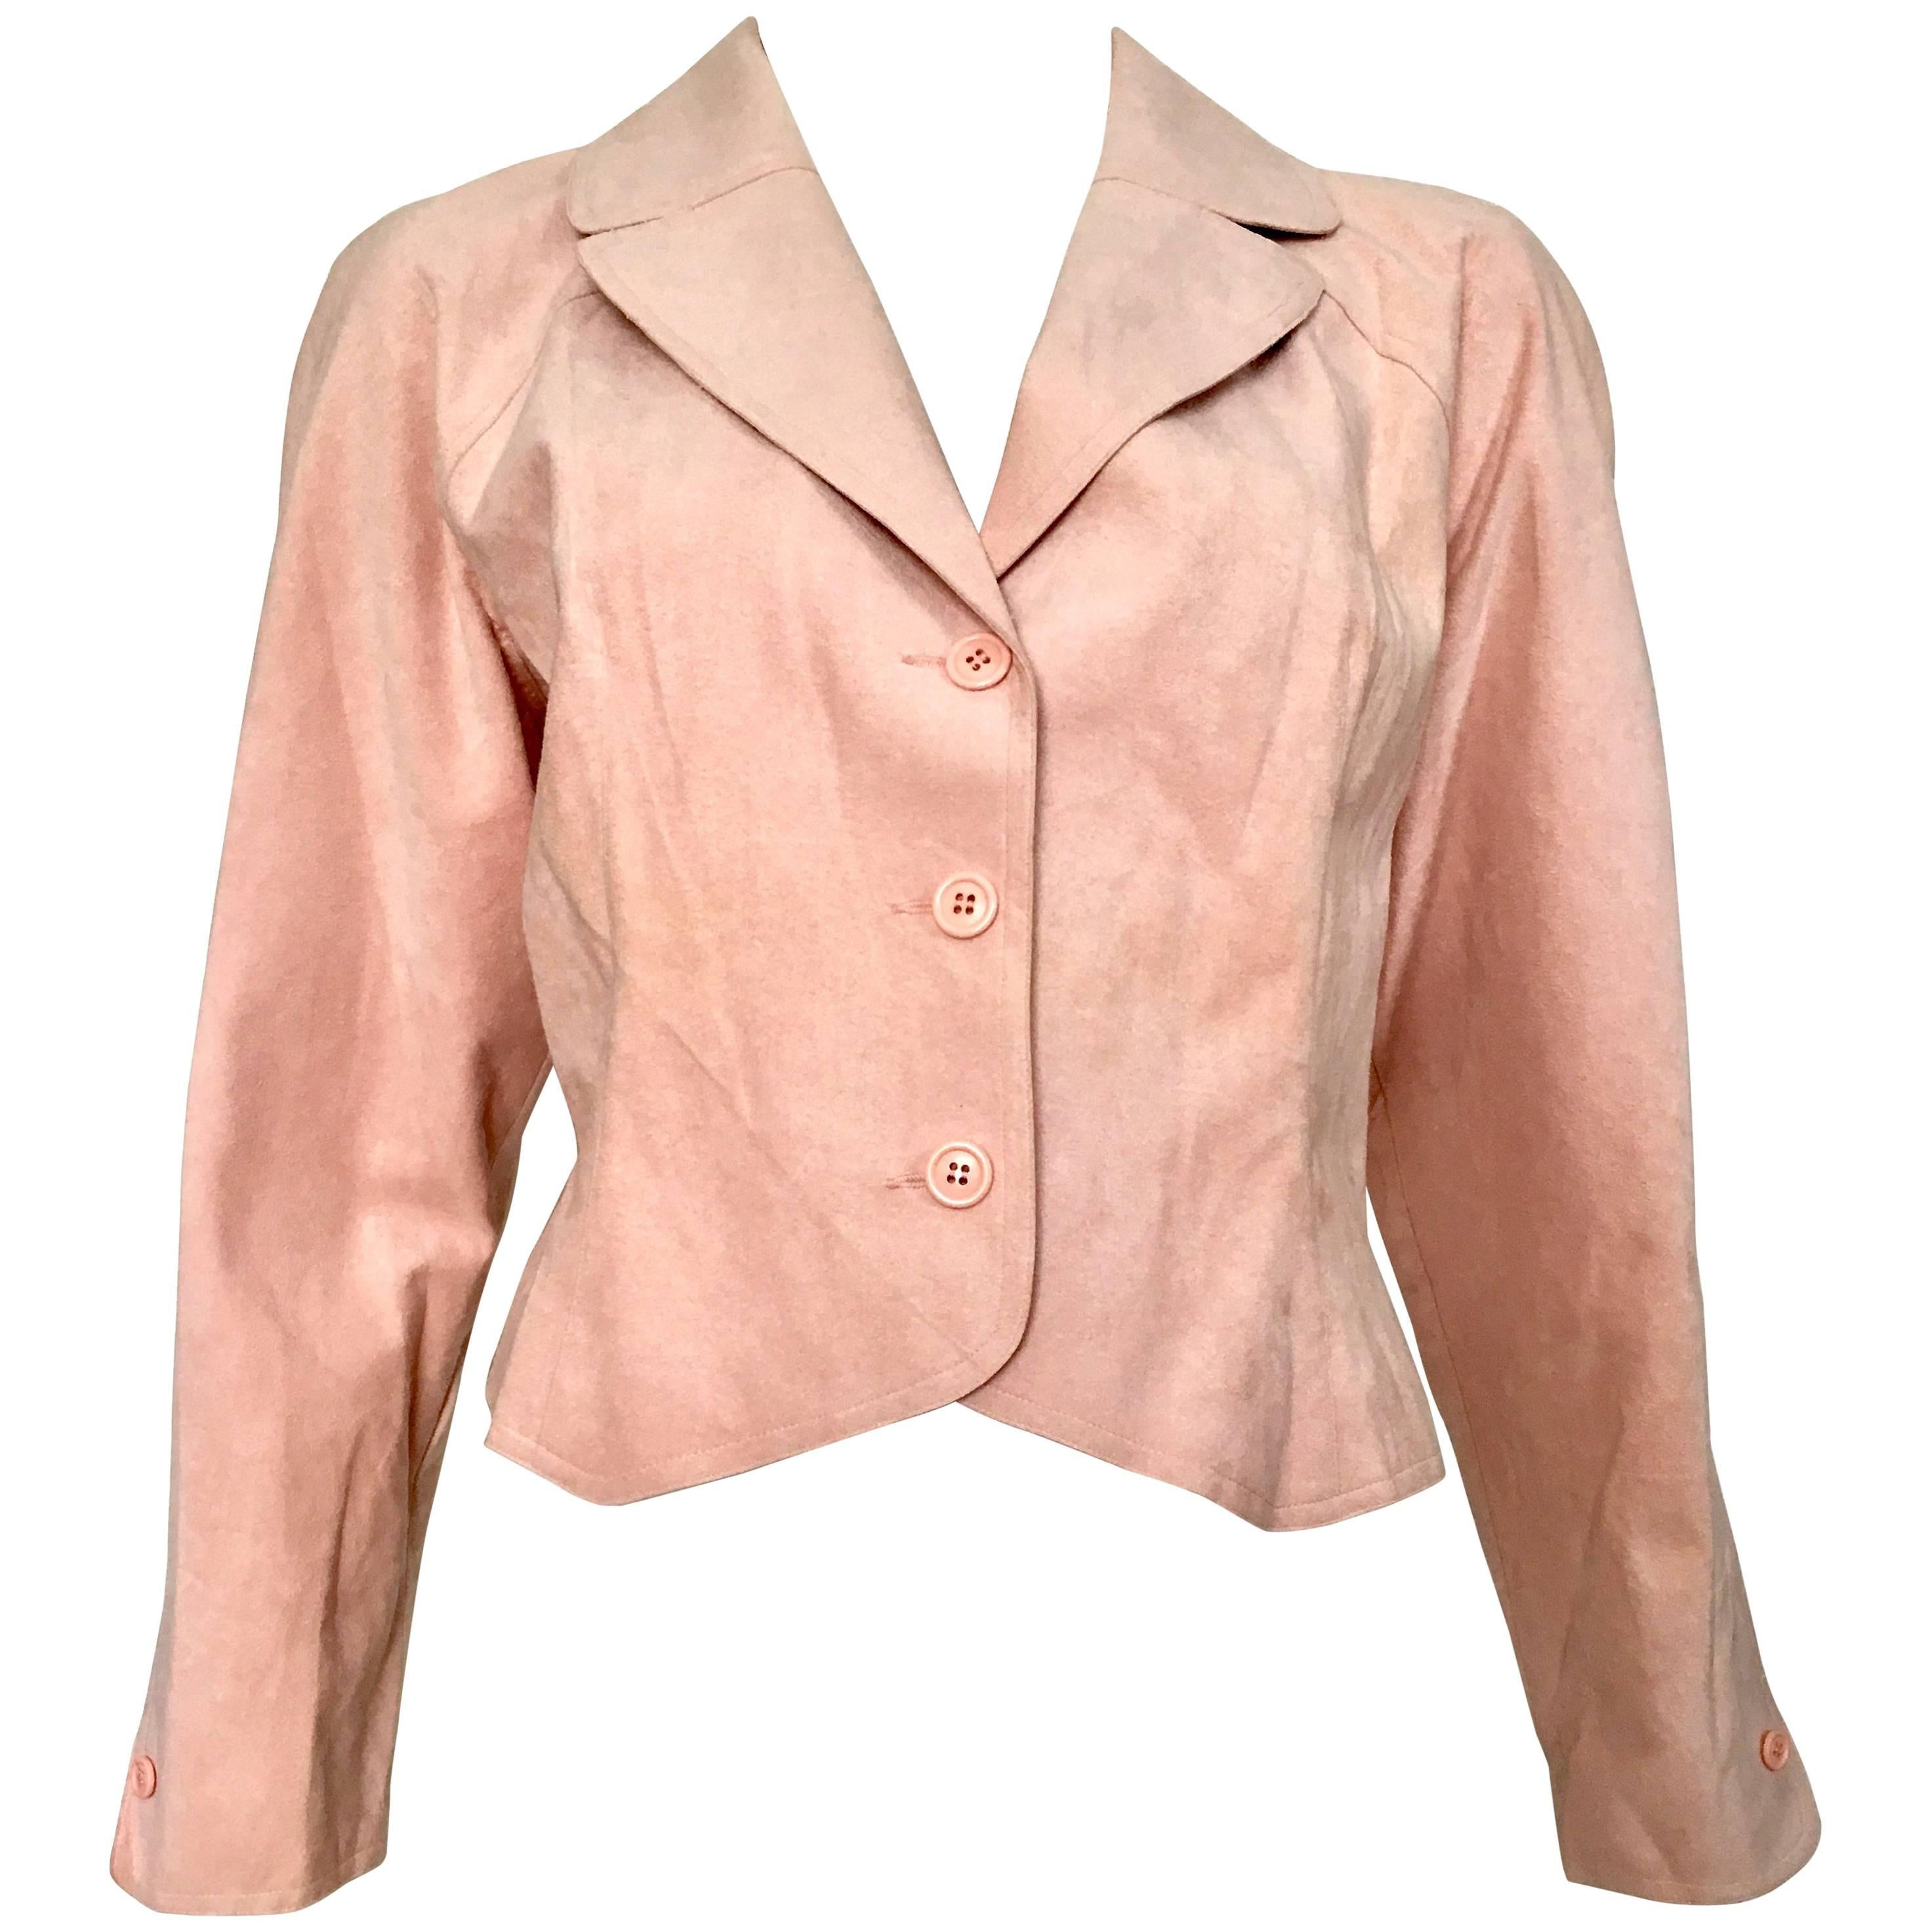 HALSTON 1970s Pink Ultra Suede Cropped Jacket Size 14. Never Worn. For Sale